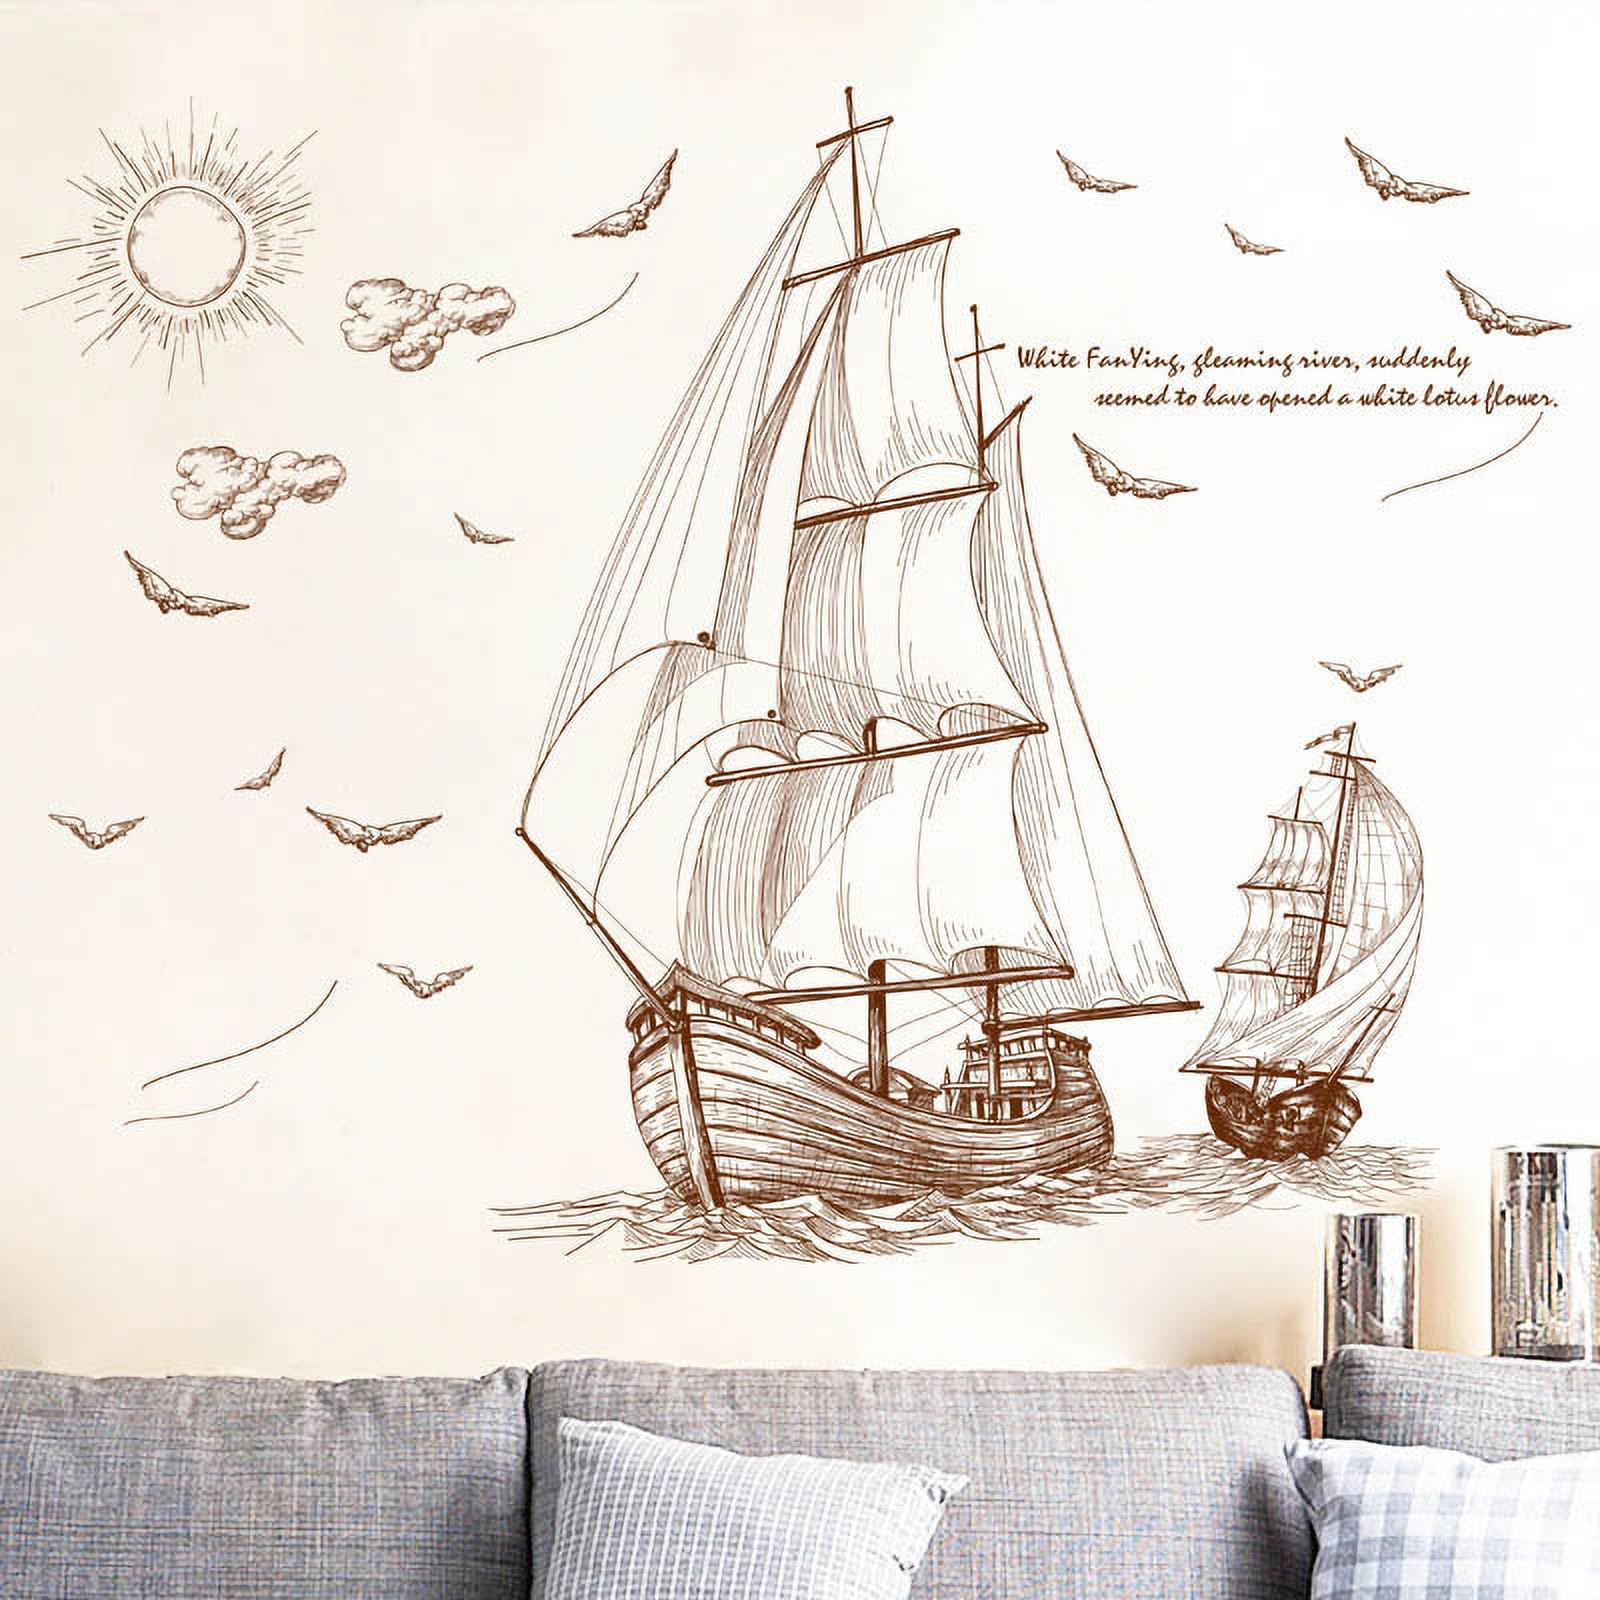 Sailing Wall Stickers Home Transfer Graphic Decal Decor Boat Stencil Boys Ship